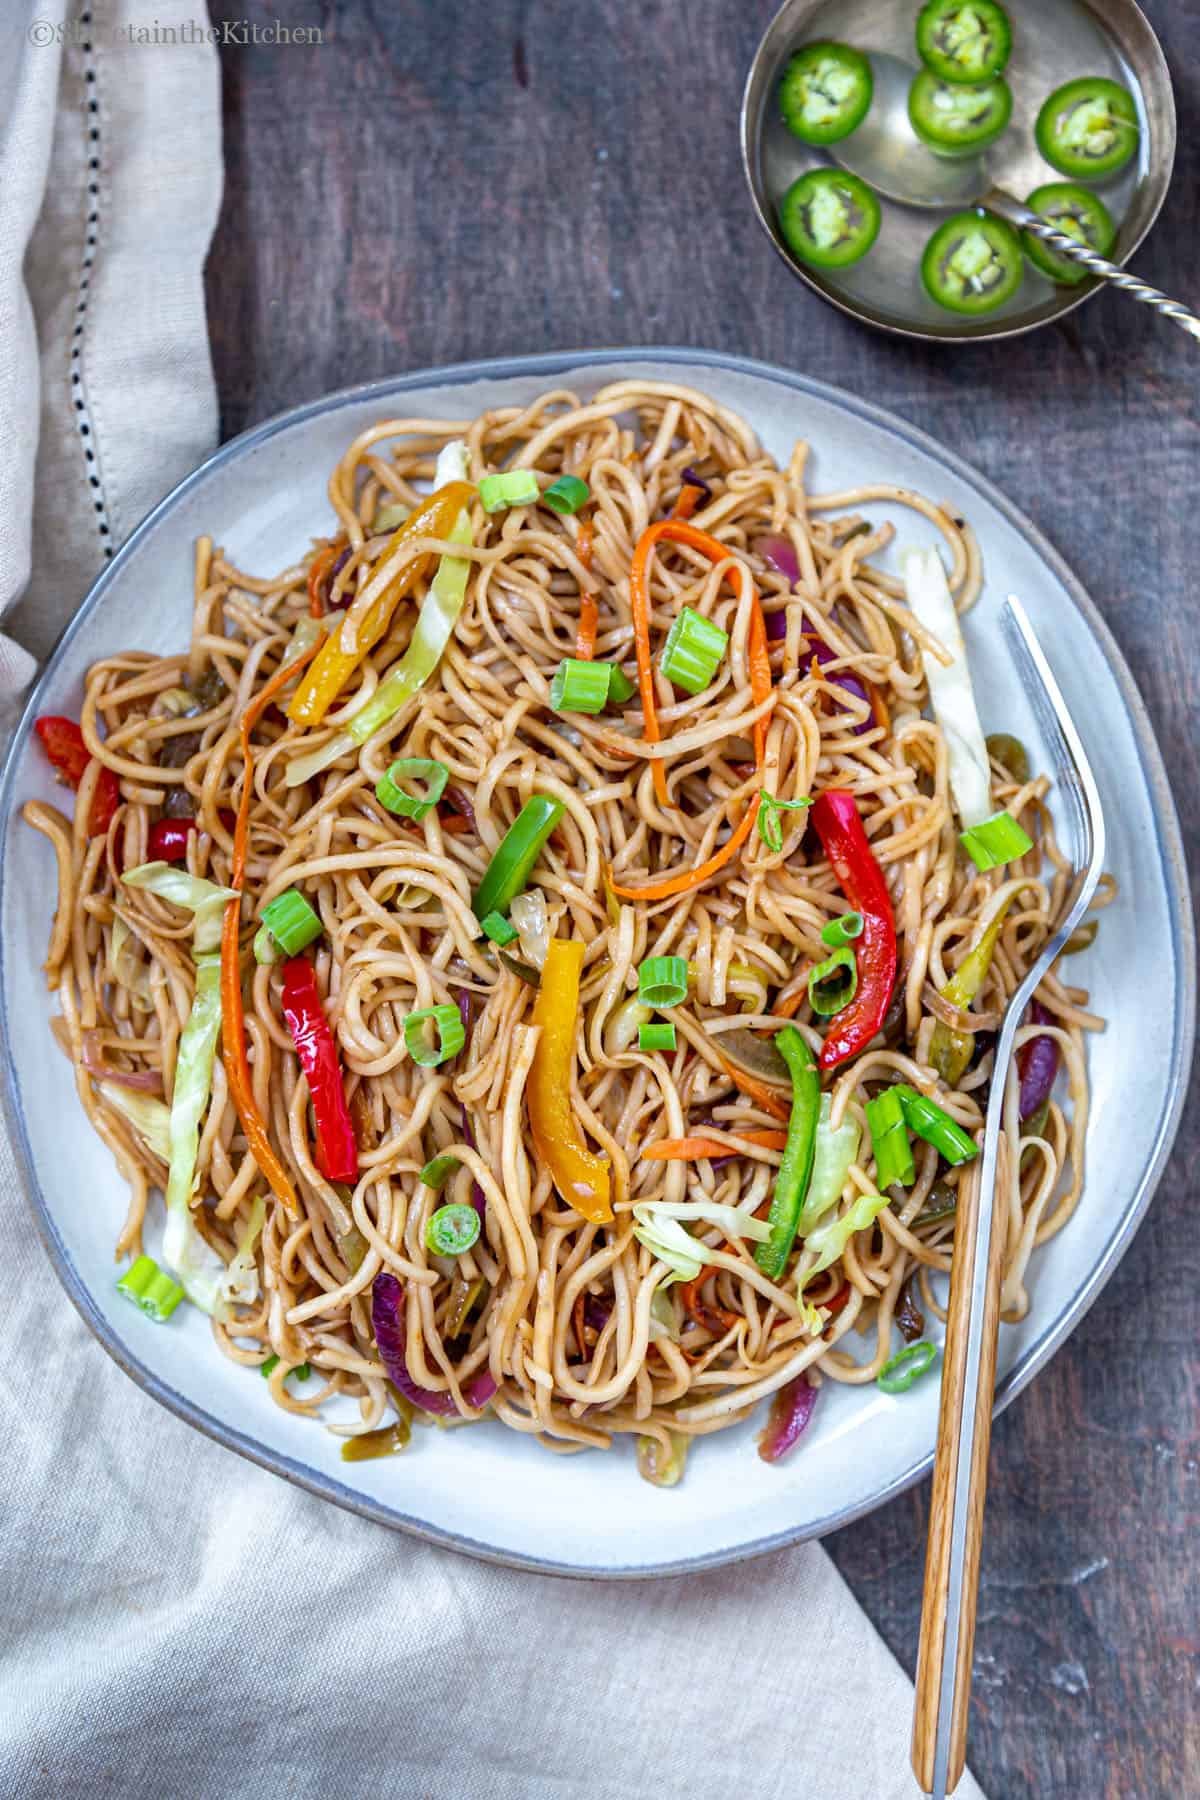 Vegetable hakka noodles on plate with fork on side and bowl of vinegar and chillies next to plate. 